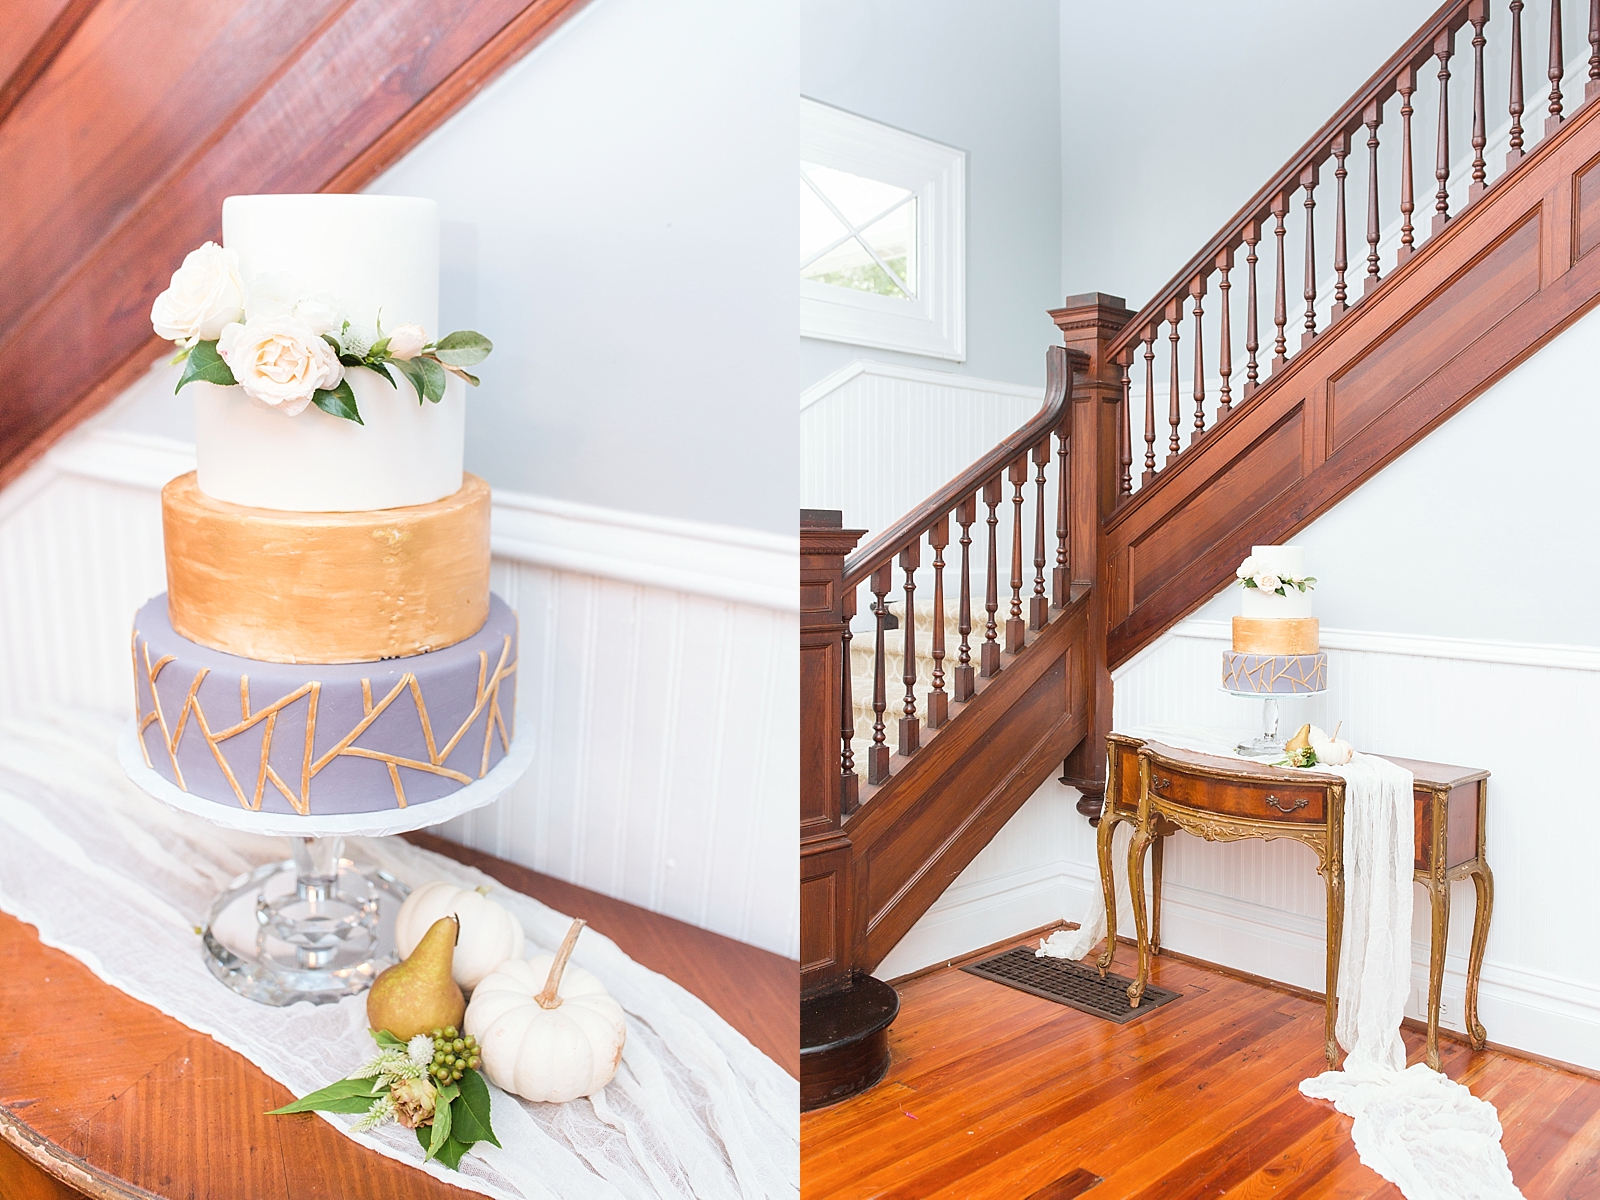 Columbia SC wedding venue cake on table in front of stair case photos